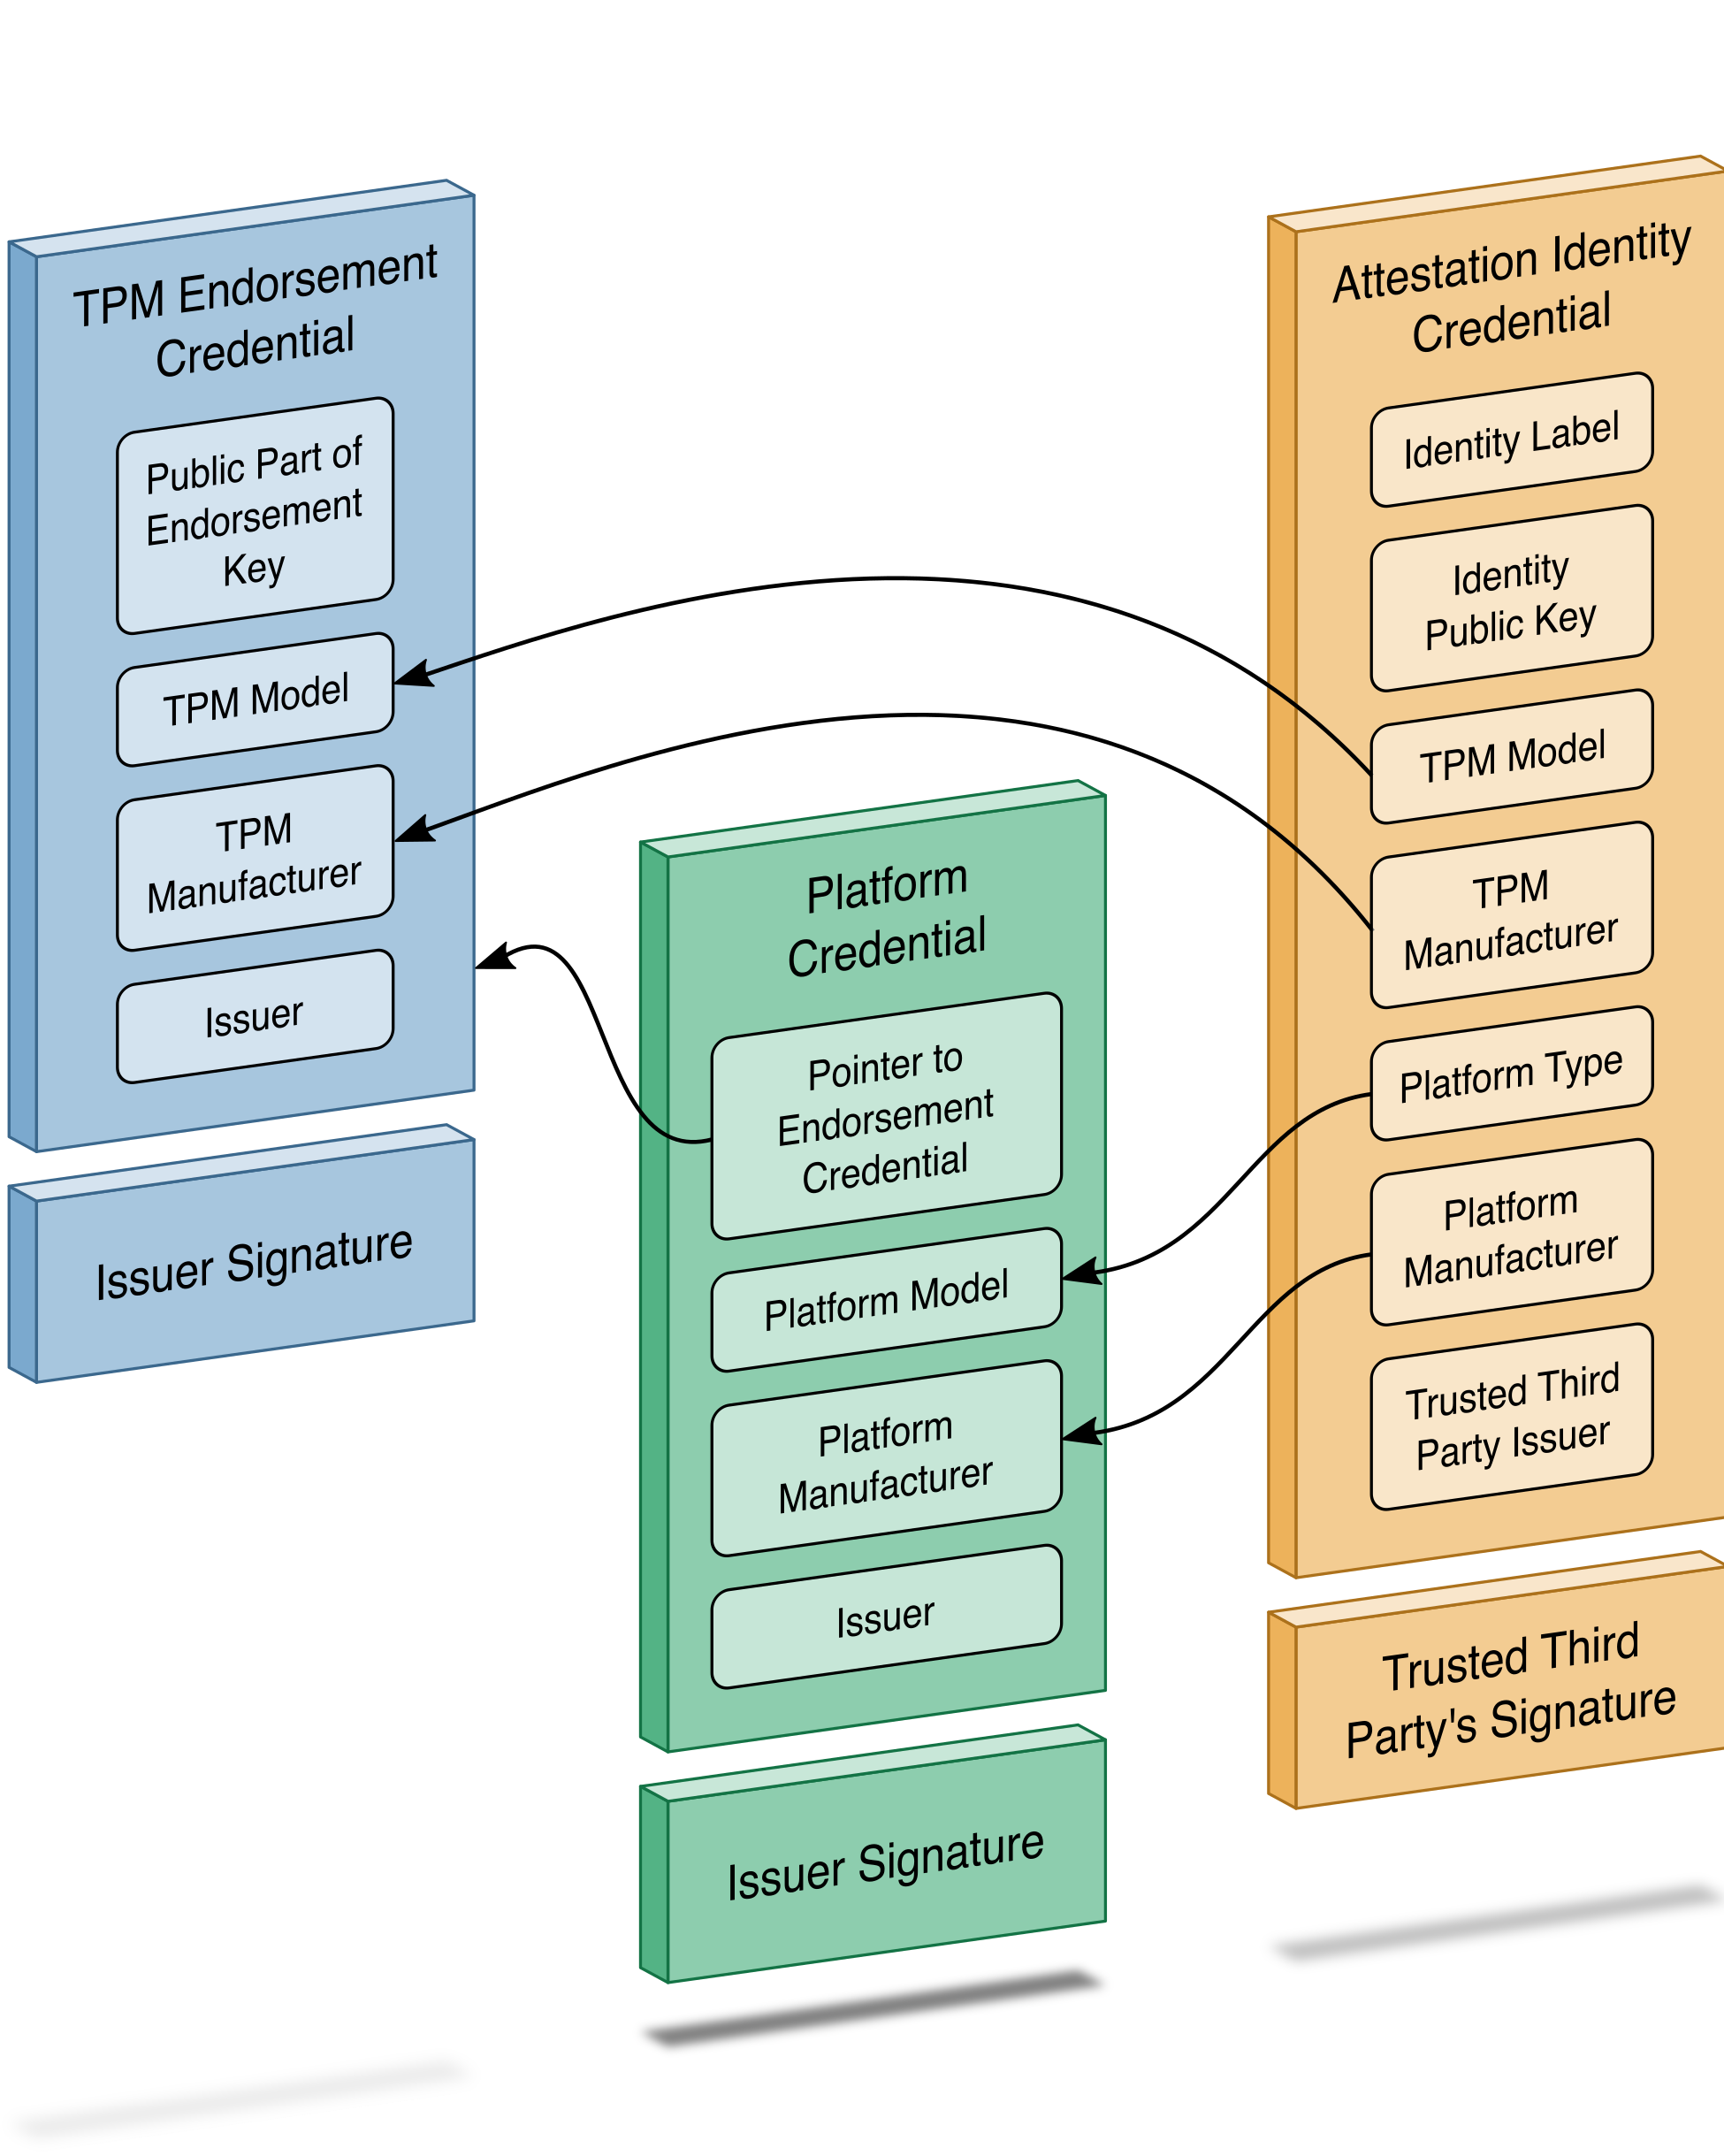 This figure shows the relationship between the elements of the TPM endorsement credential, the platform credential, and the attestation identity credential. It is based on a graphic from the TCG Credential Profiles for TPM.